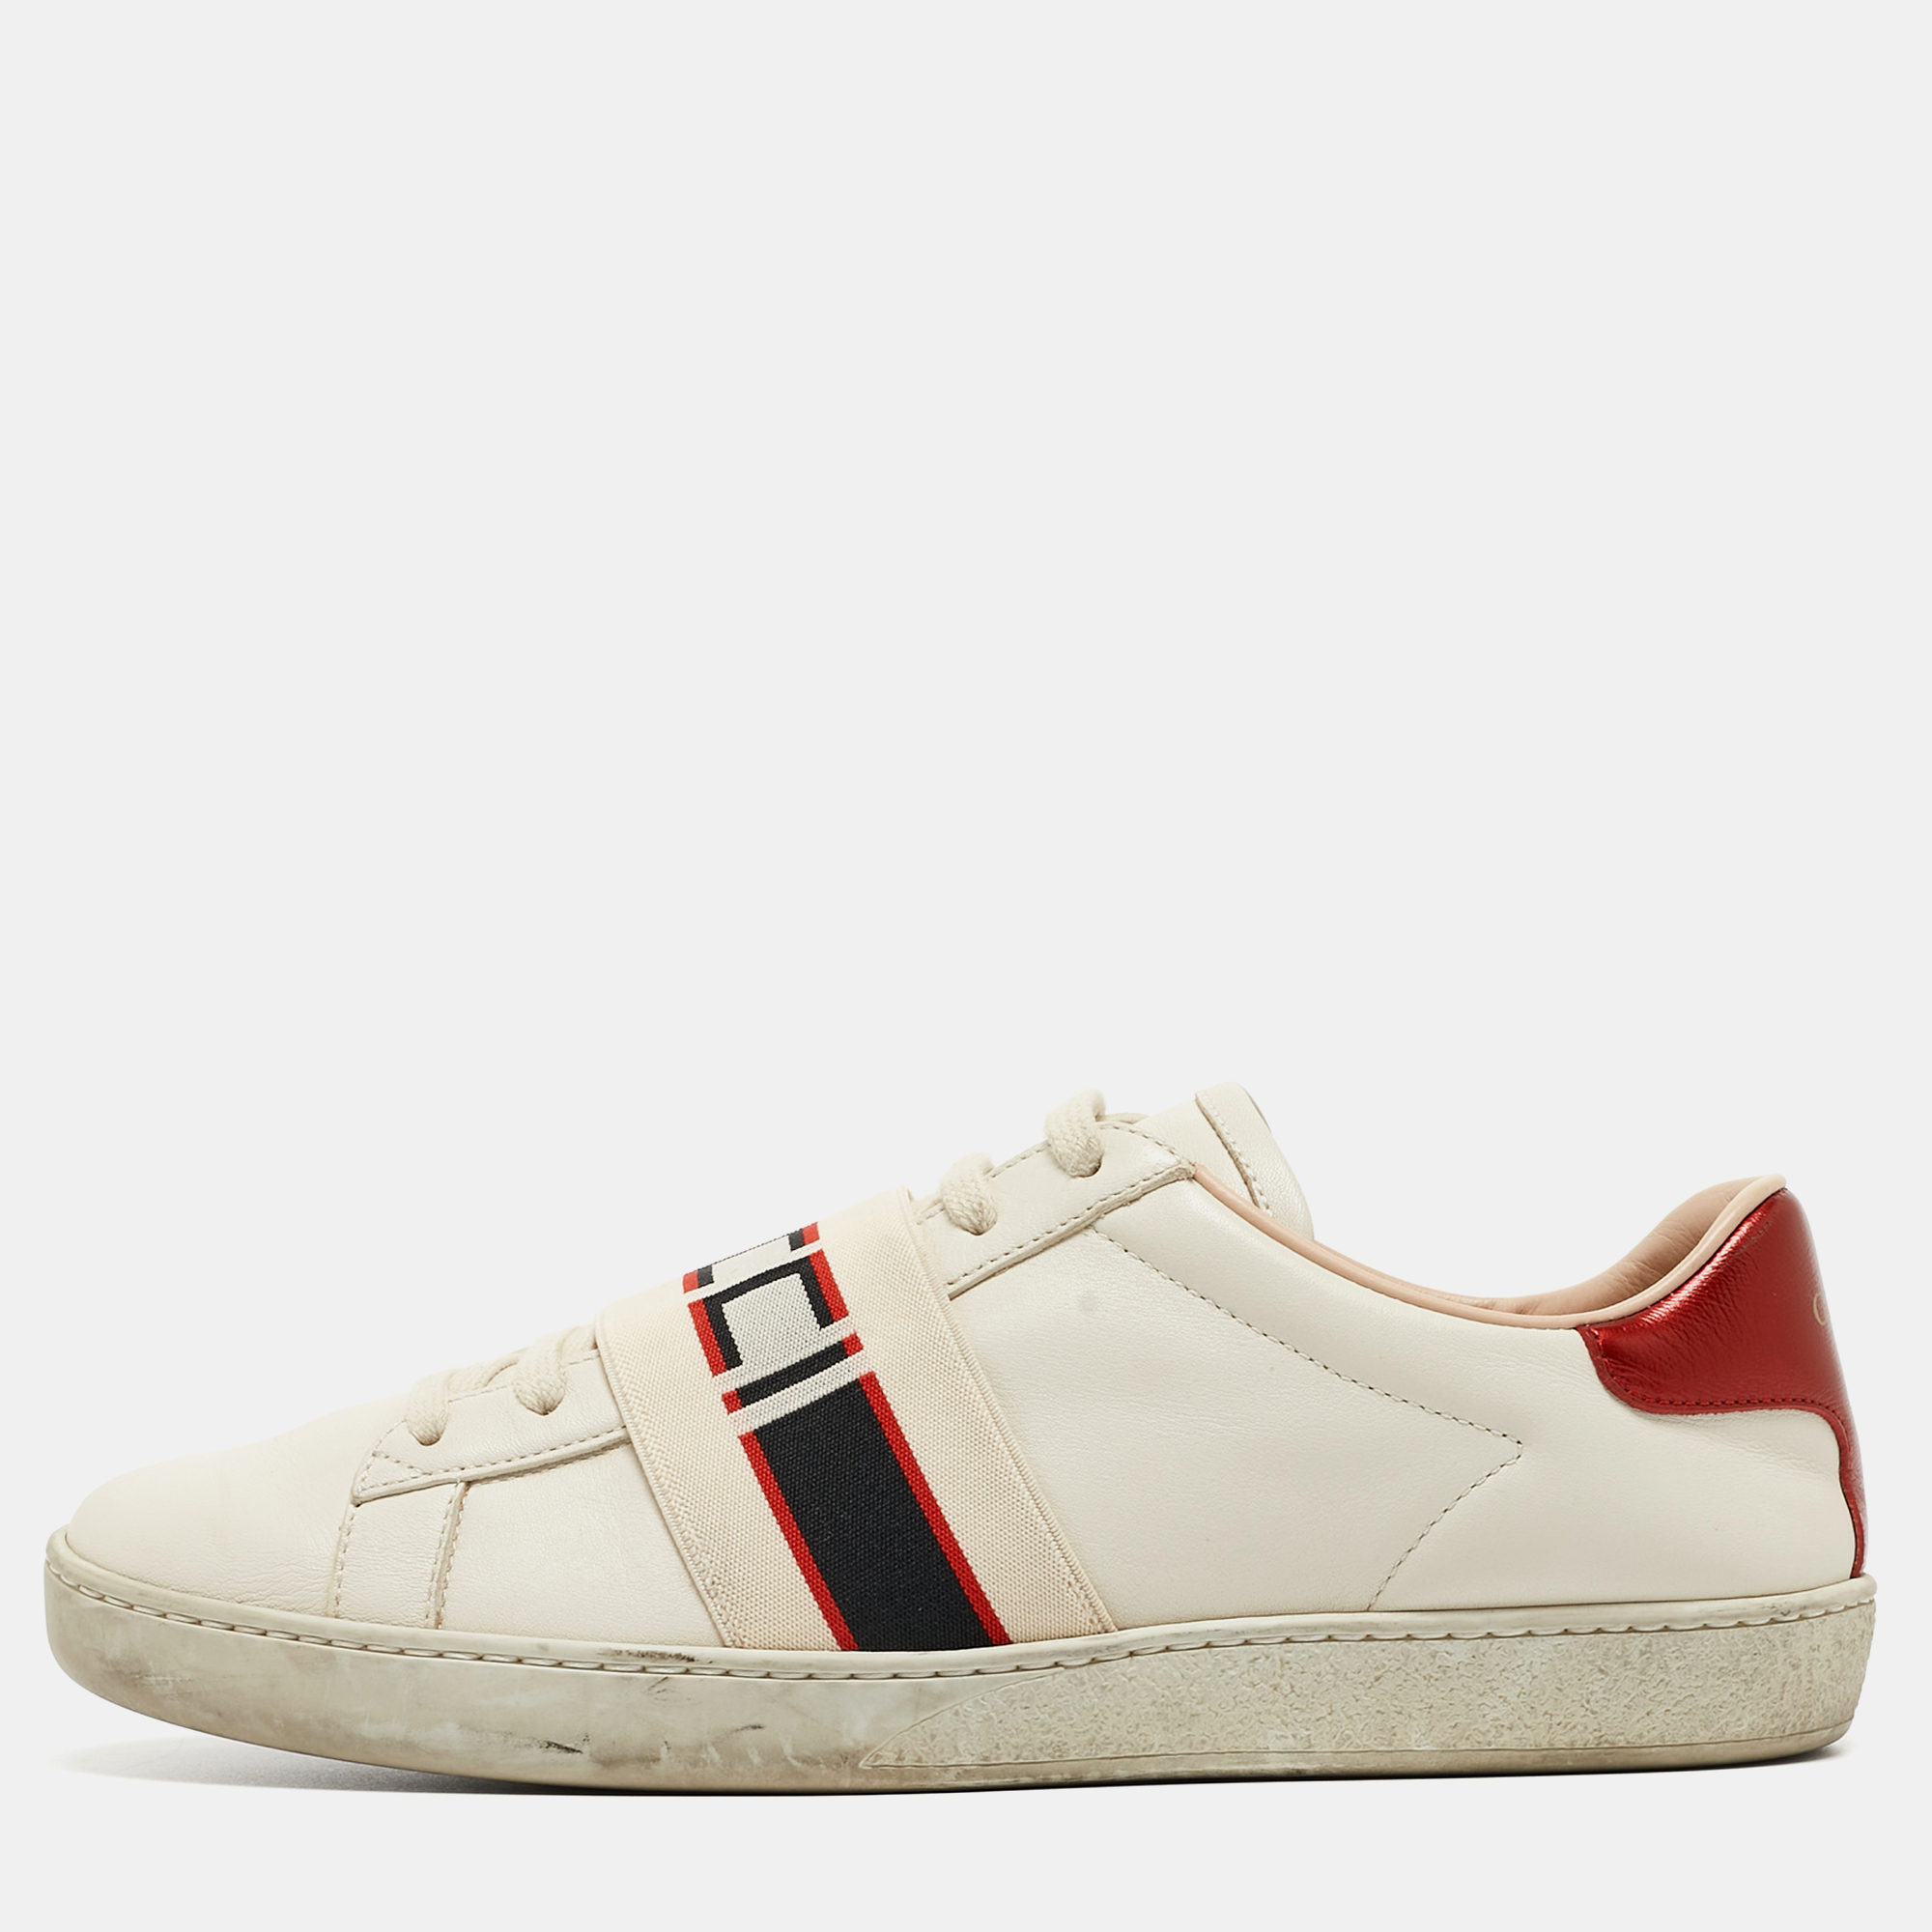 Pre-owned Gucci Off White/red Leather Ace Stripe Sneakers Size 39